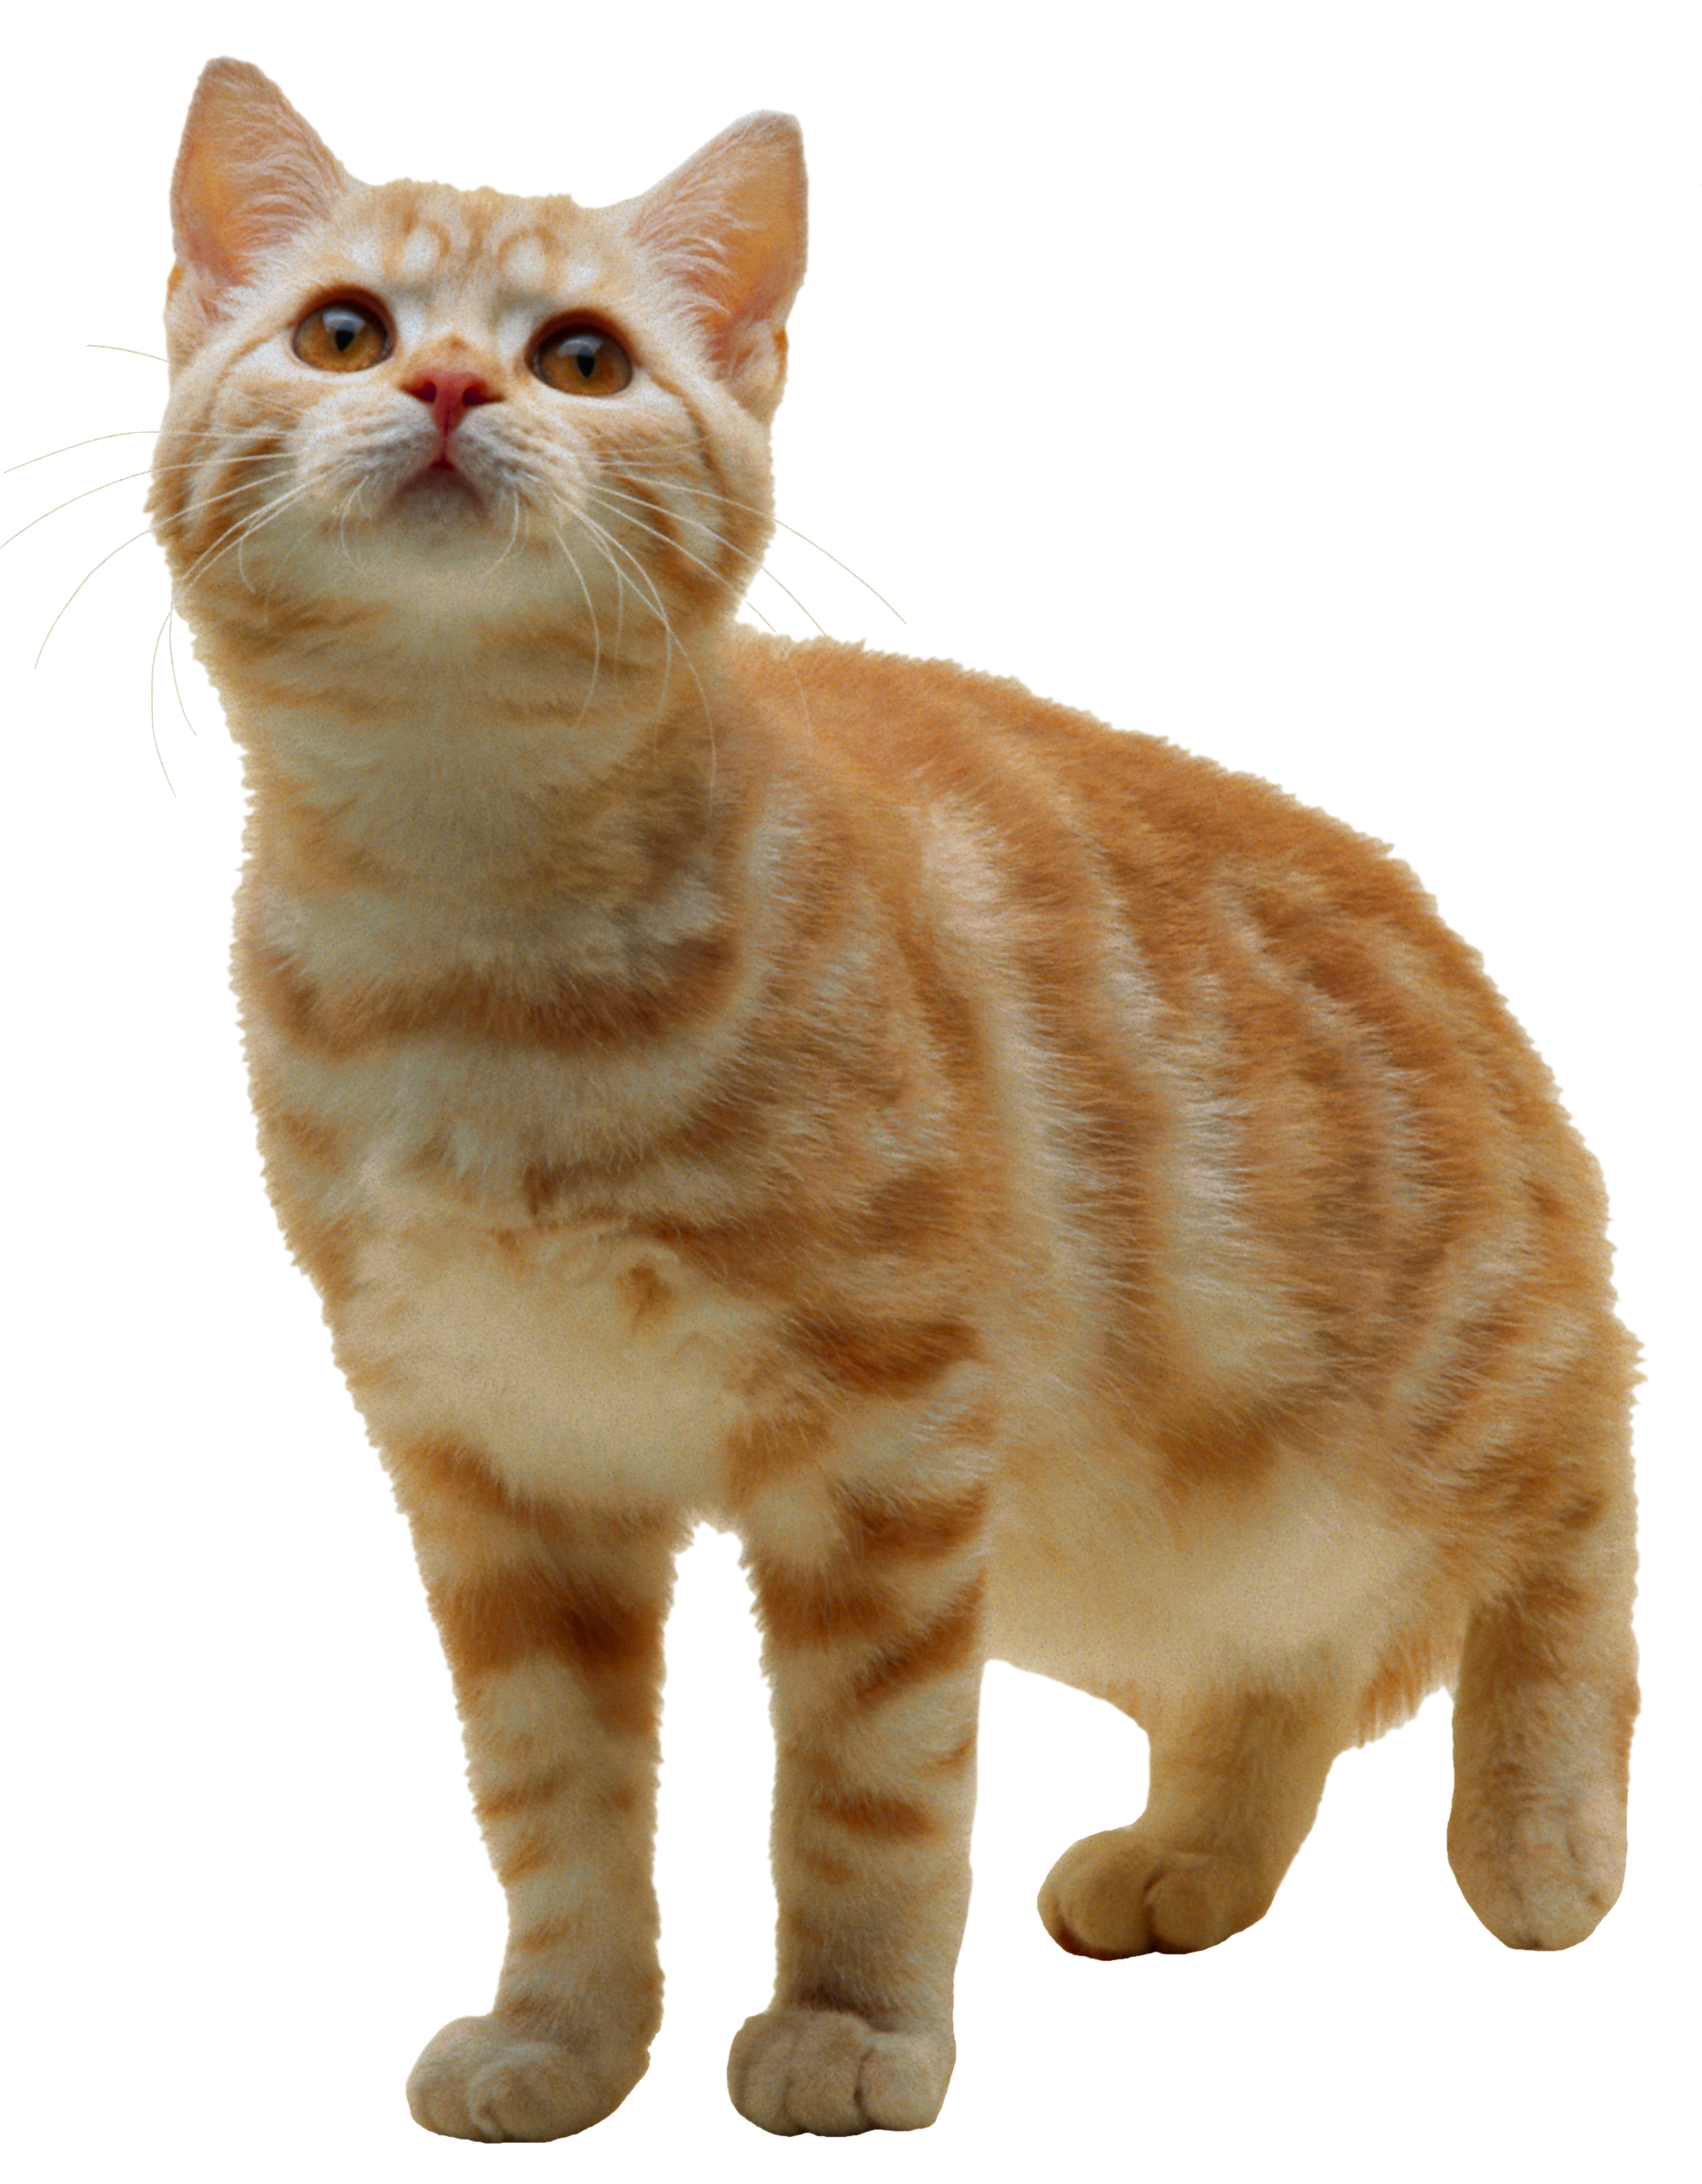 Cat Png Image, Free Download Picture, Kitten - Kitten, Transparent background PNG HD thumbnail